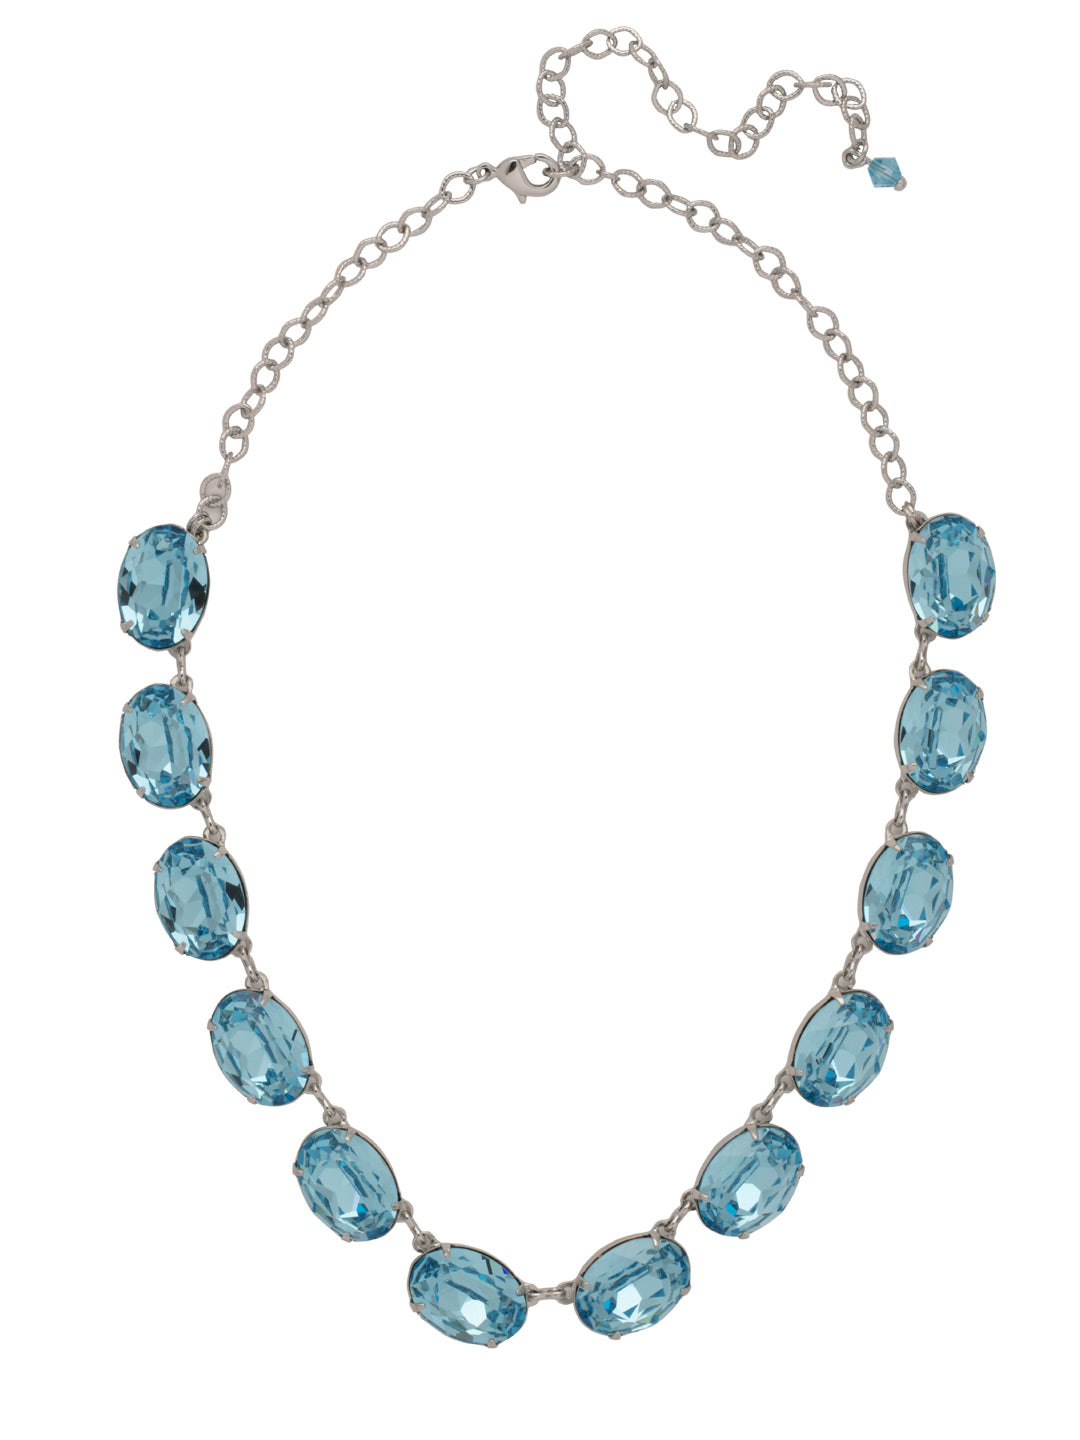 Julianna Oval Statement Necklace - NFD76PDAQU - <p>The Julianna Oval Statement Necklace features a row of open back round candy drop crystals around an adjustable chain, secured with a lobster claw clasp. From Sorrelli's Aquamarine collection in our Palladium finish.</p>